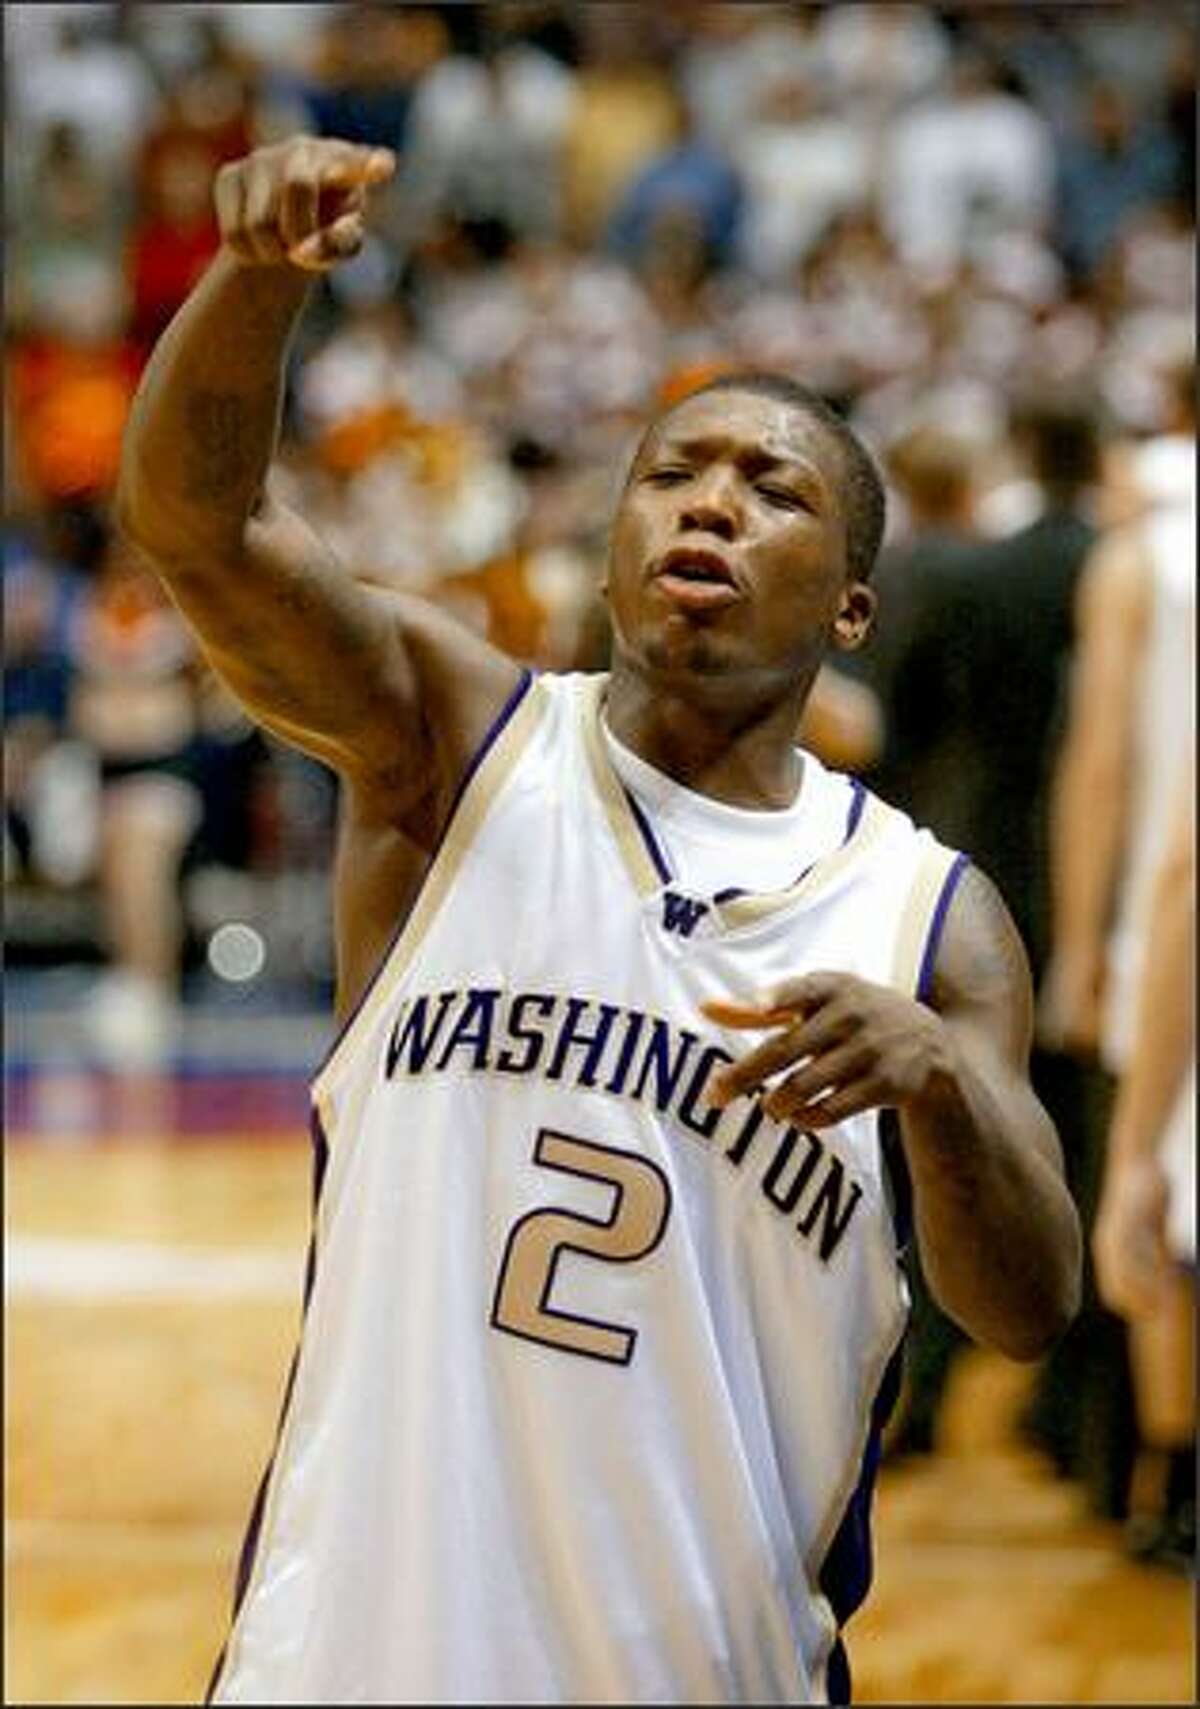 Great things do come in small packages. Here, in honor of Nate Robinson, the Huskies' undersized (5' 7 3/4") yet dunkalicious basketball star, we're celebrating some of life's petite delights.These are a few of our favorite (small) things...